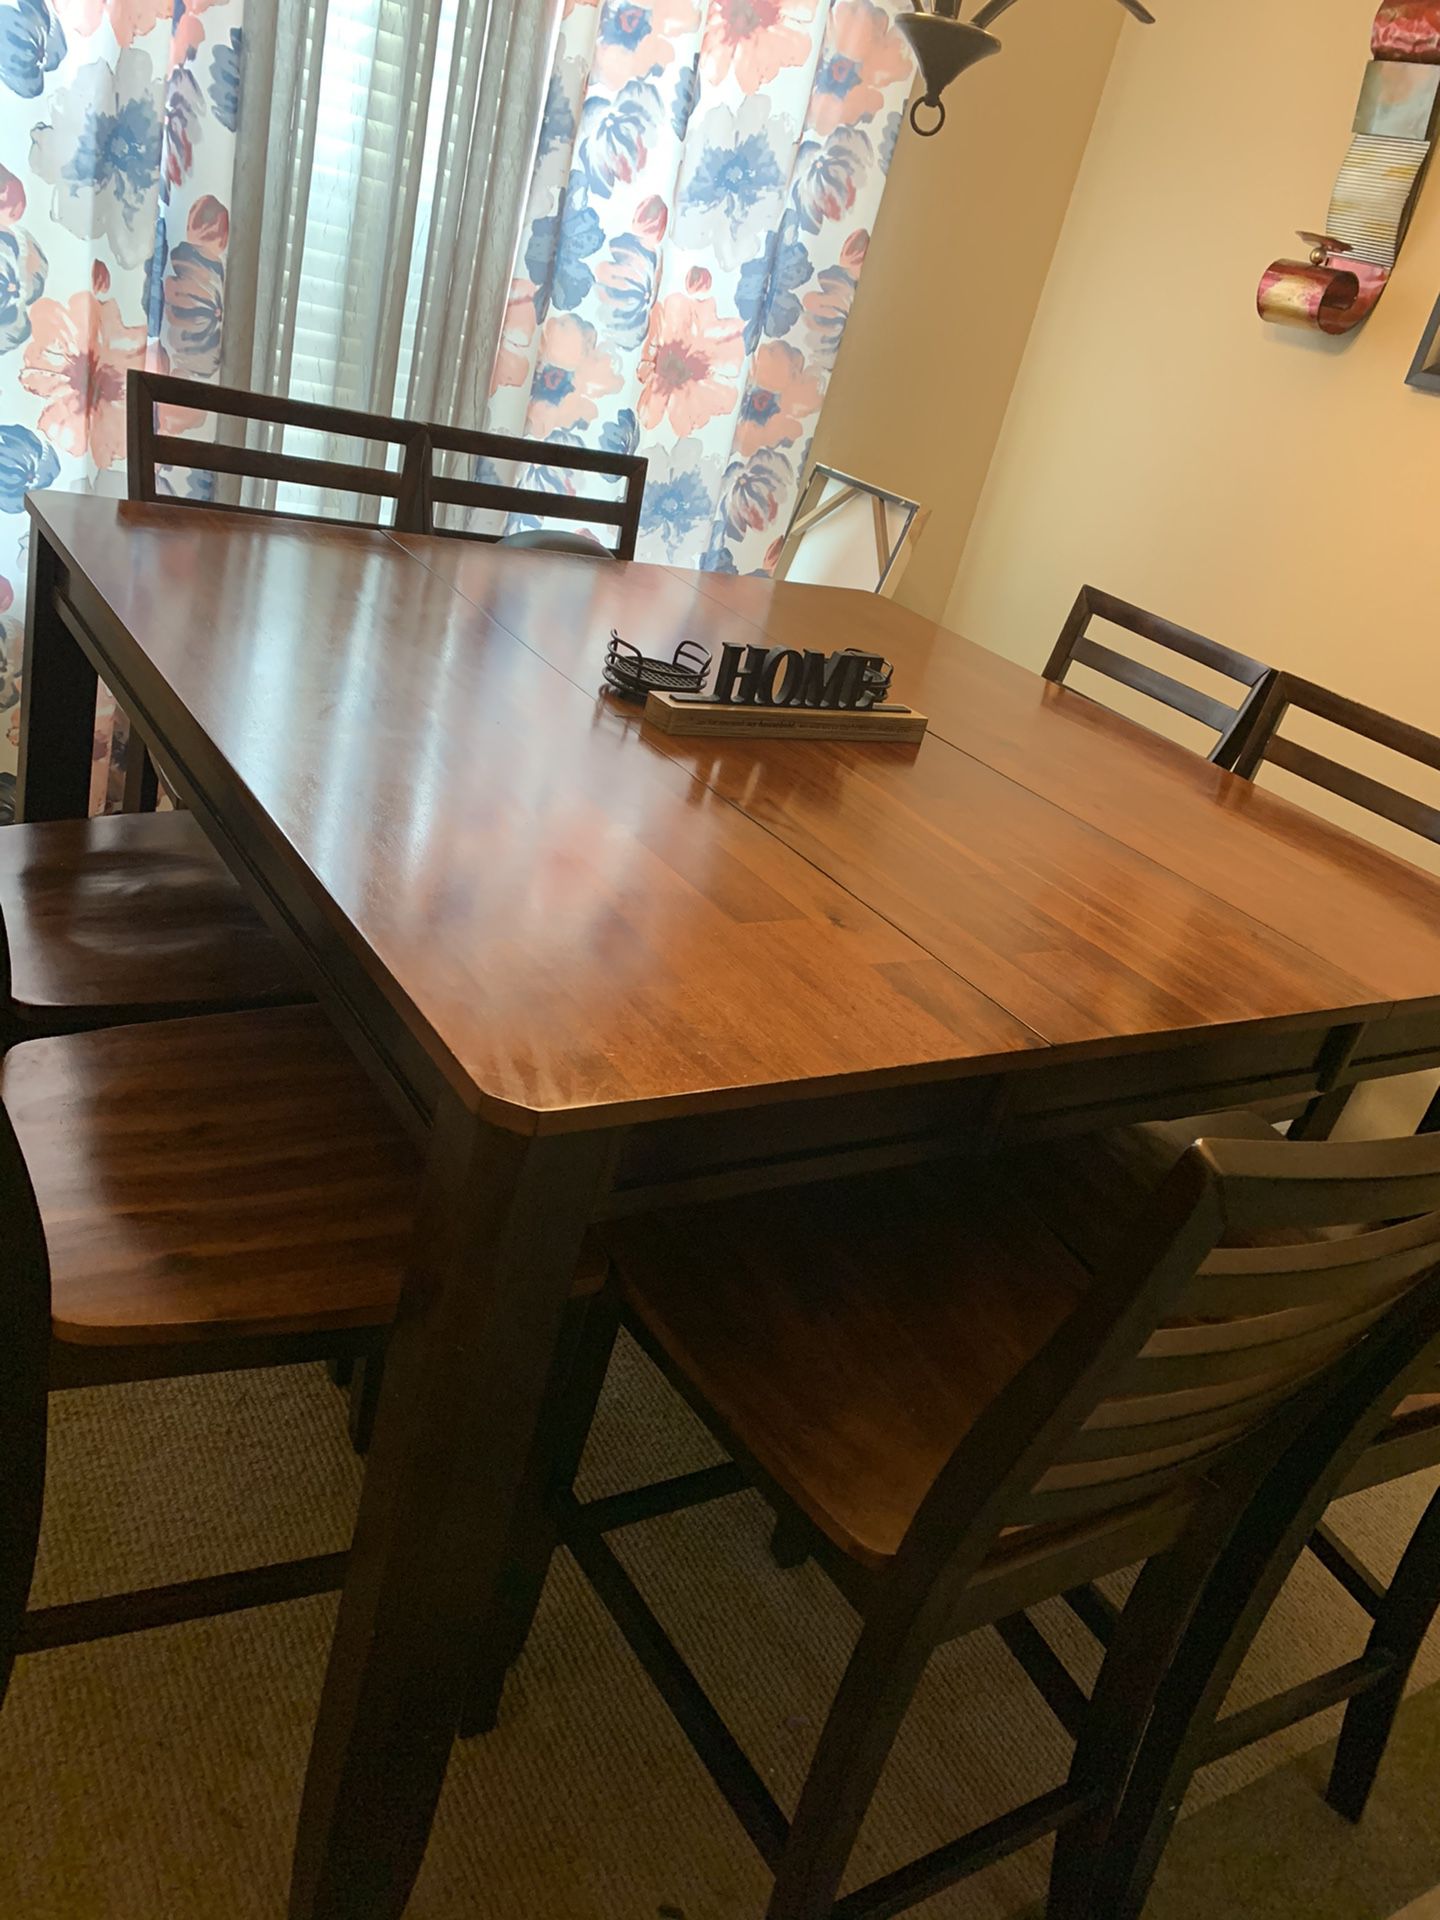 Dining Table with 8 chairs